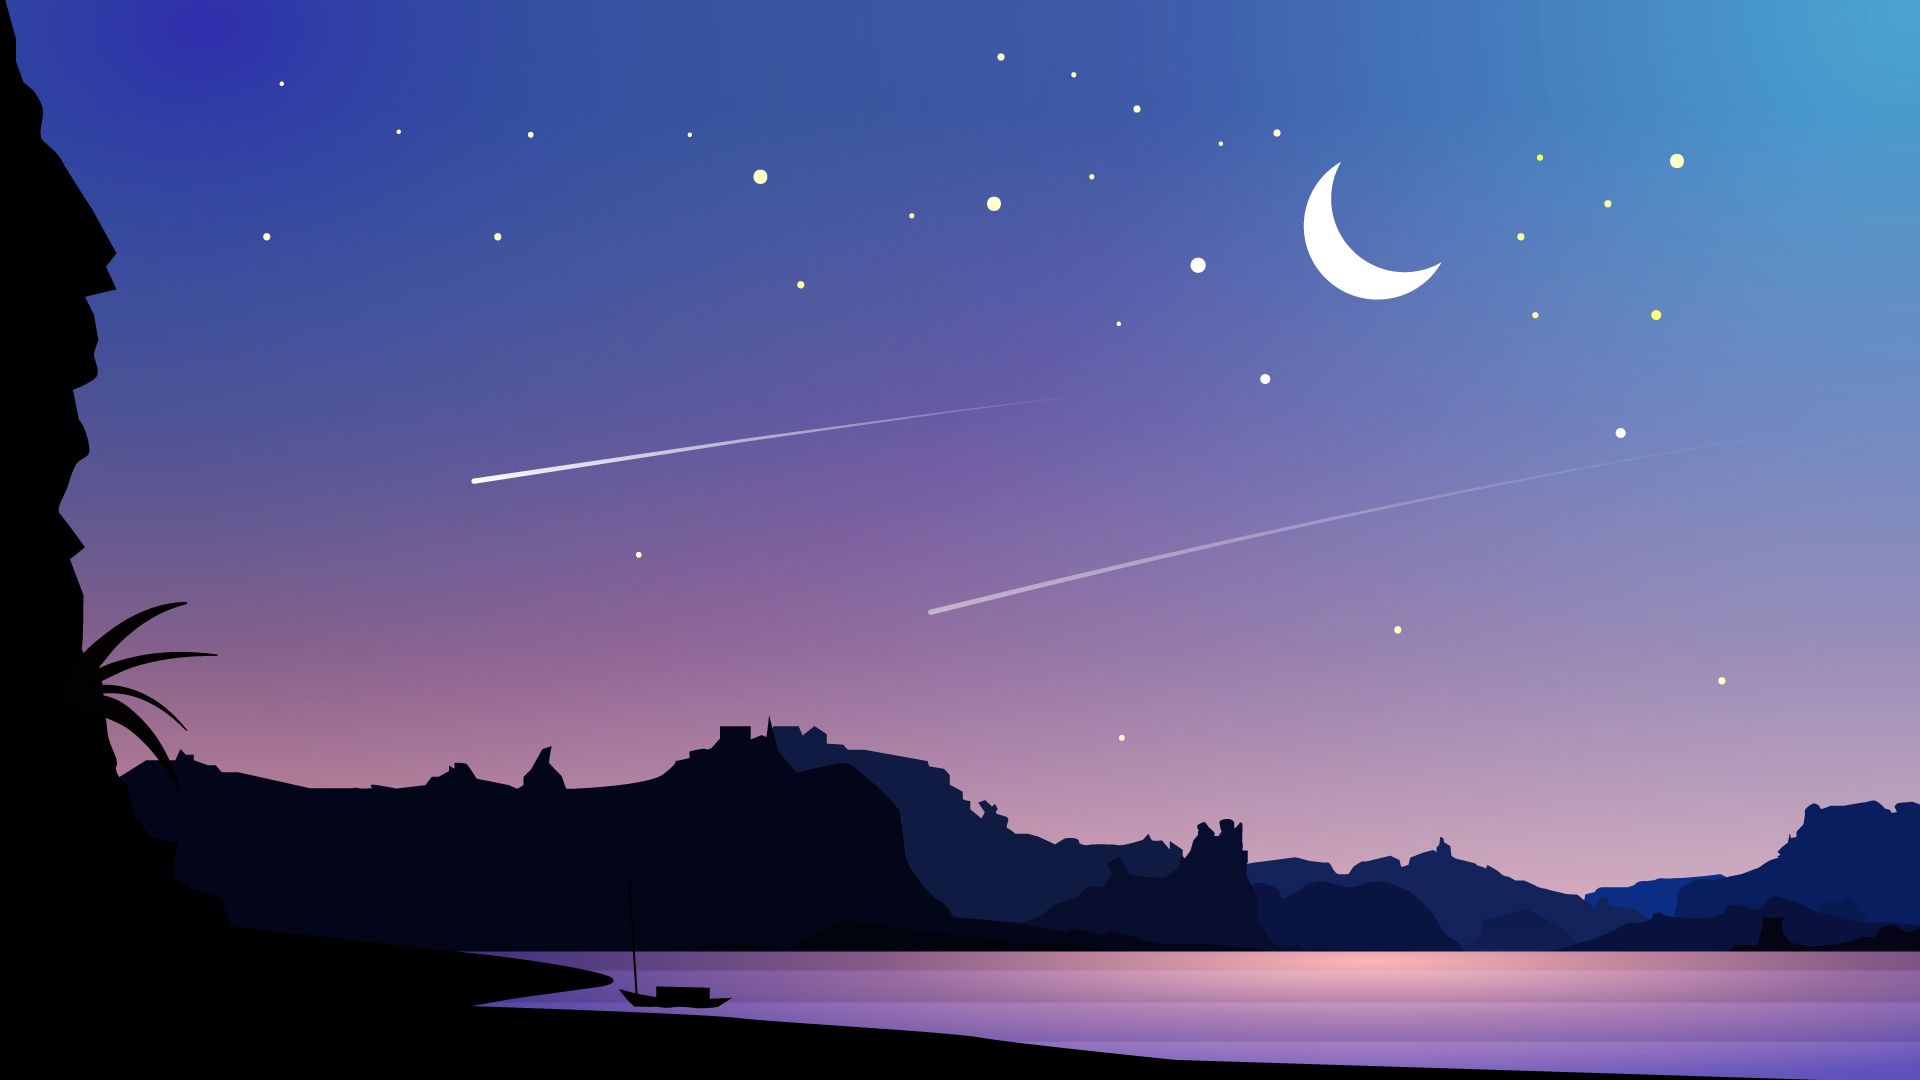 The sky is full of stars, shooting stars, and a crescent moon. - Desktop, 1920x1080, computer, HD, landscape, scenery, night